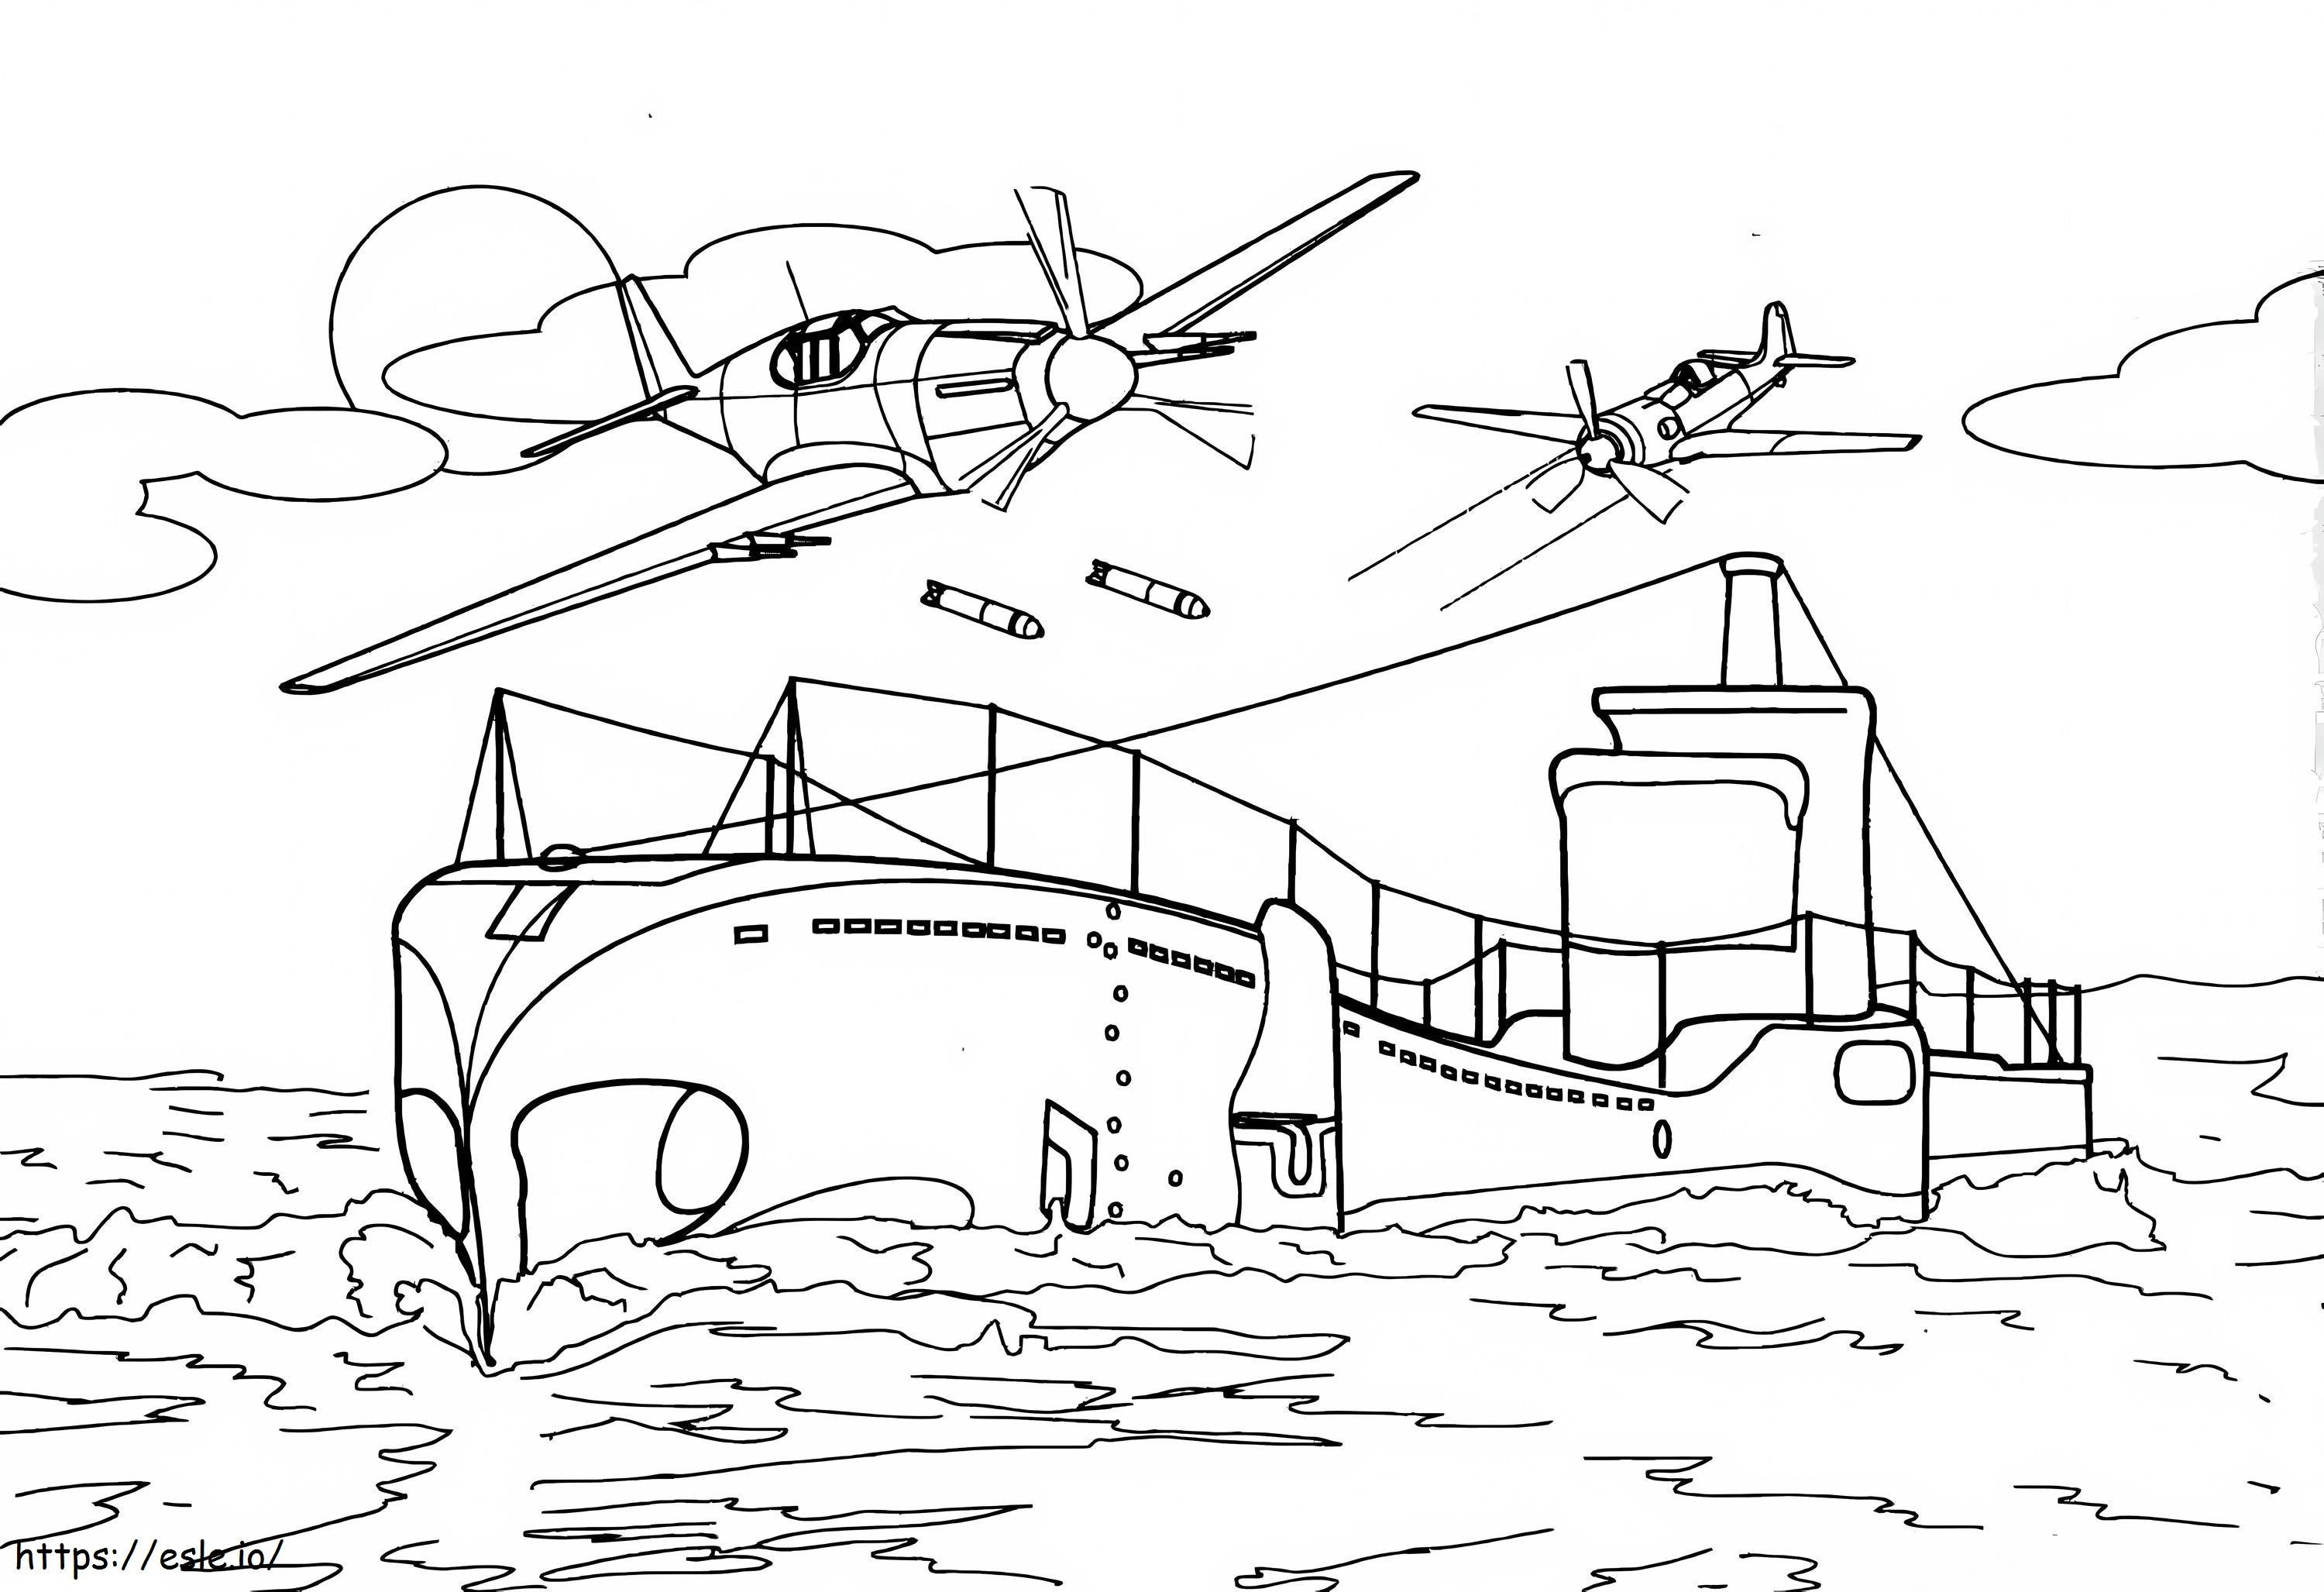 Submarine And Two Helicopters coloring page